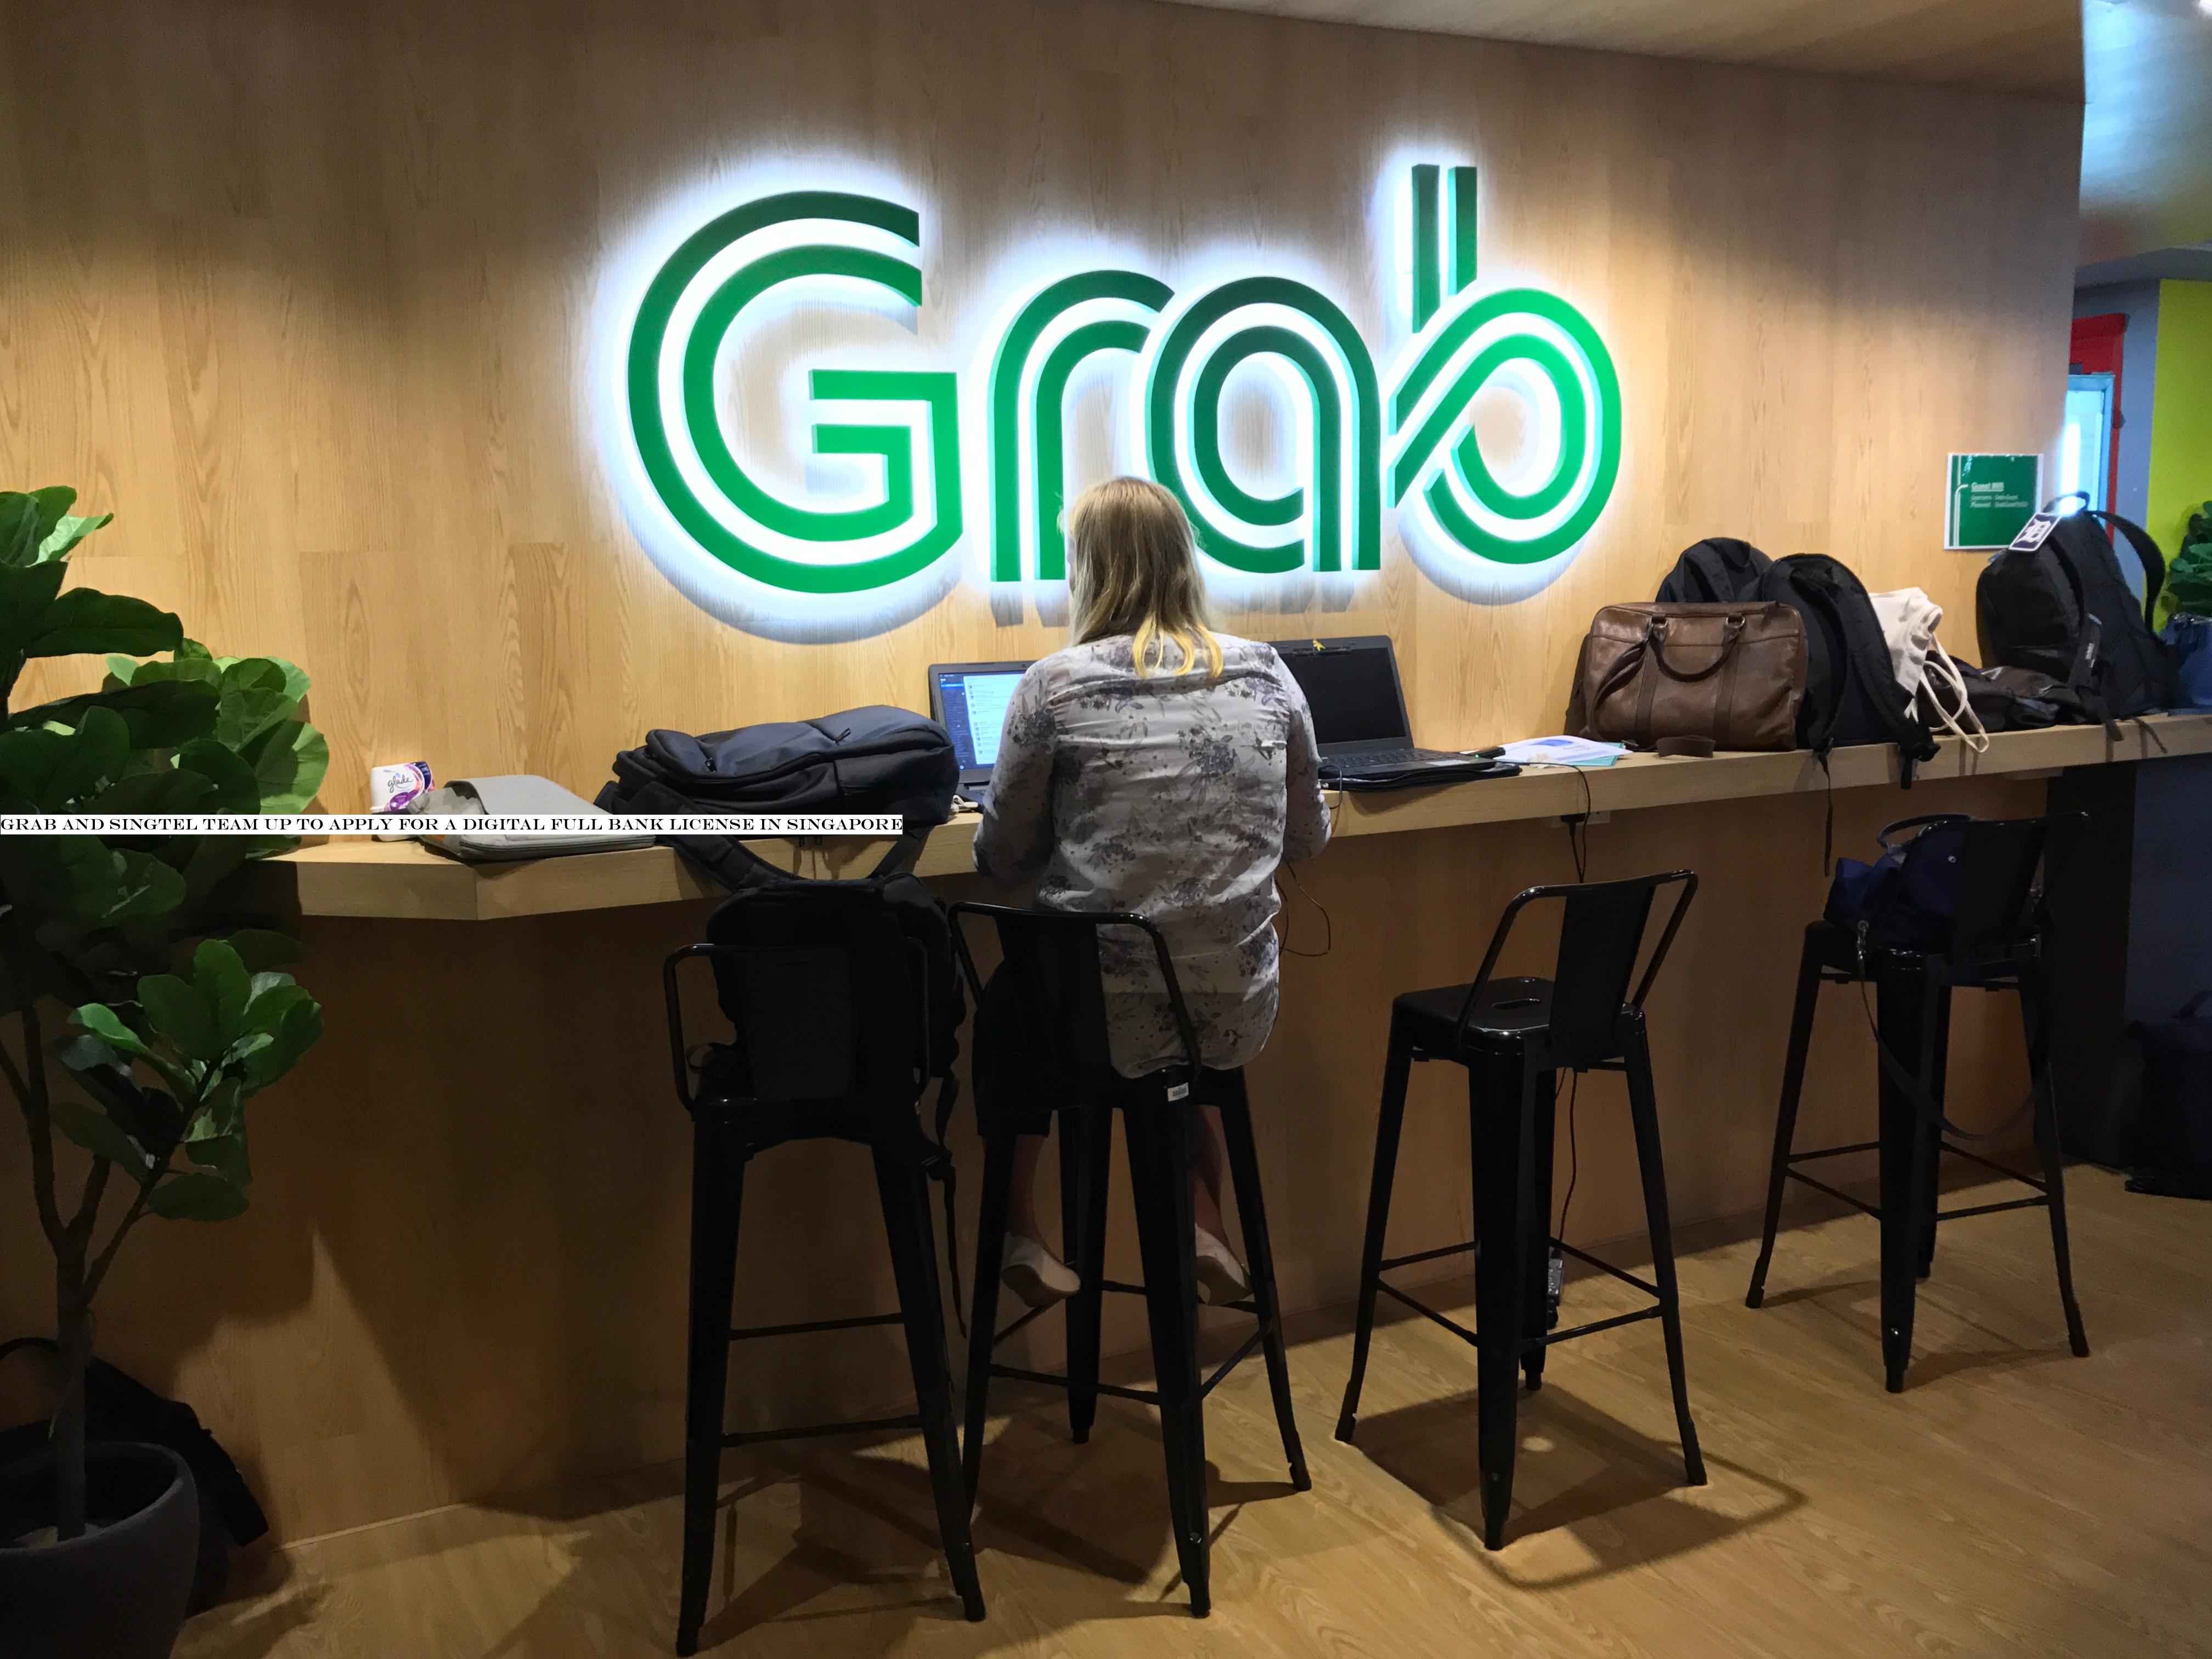 Grab and Singtel team up to apply for a digital full bank license in Singapore